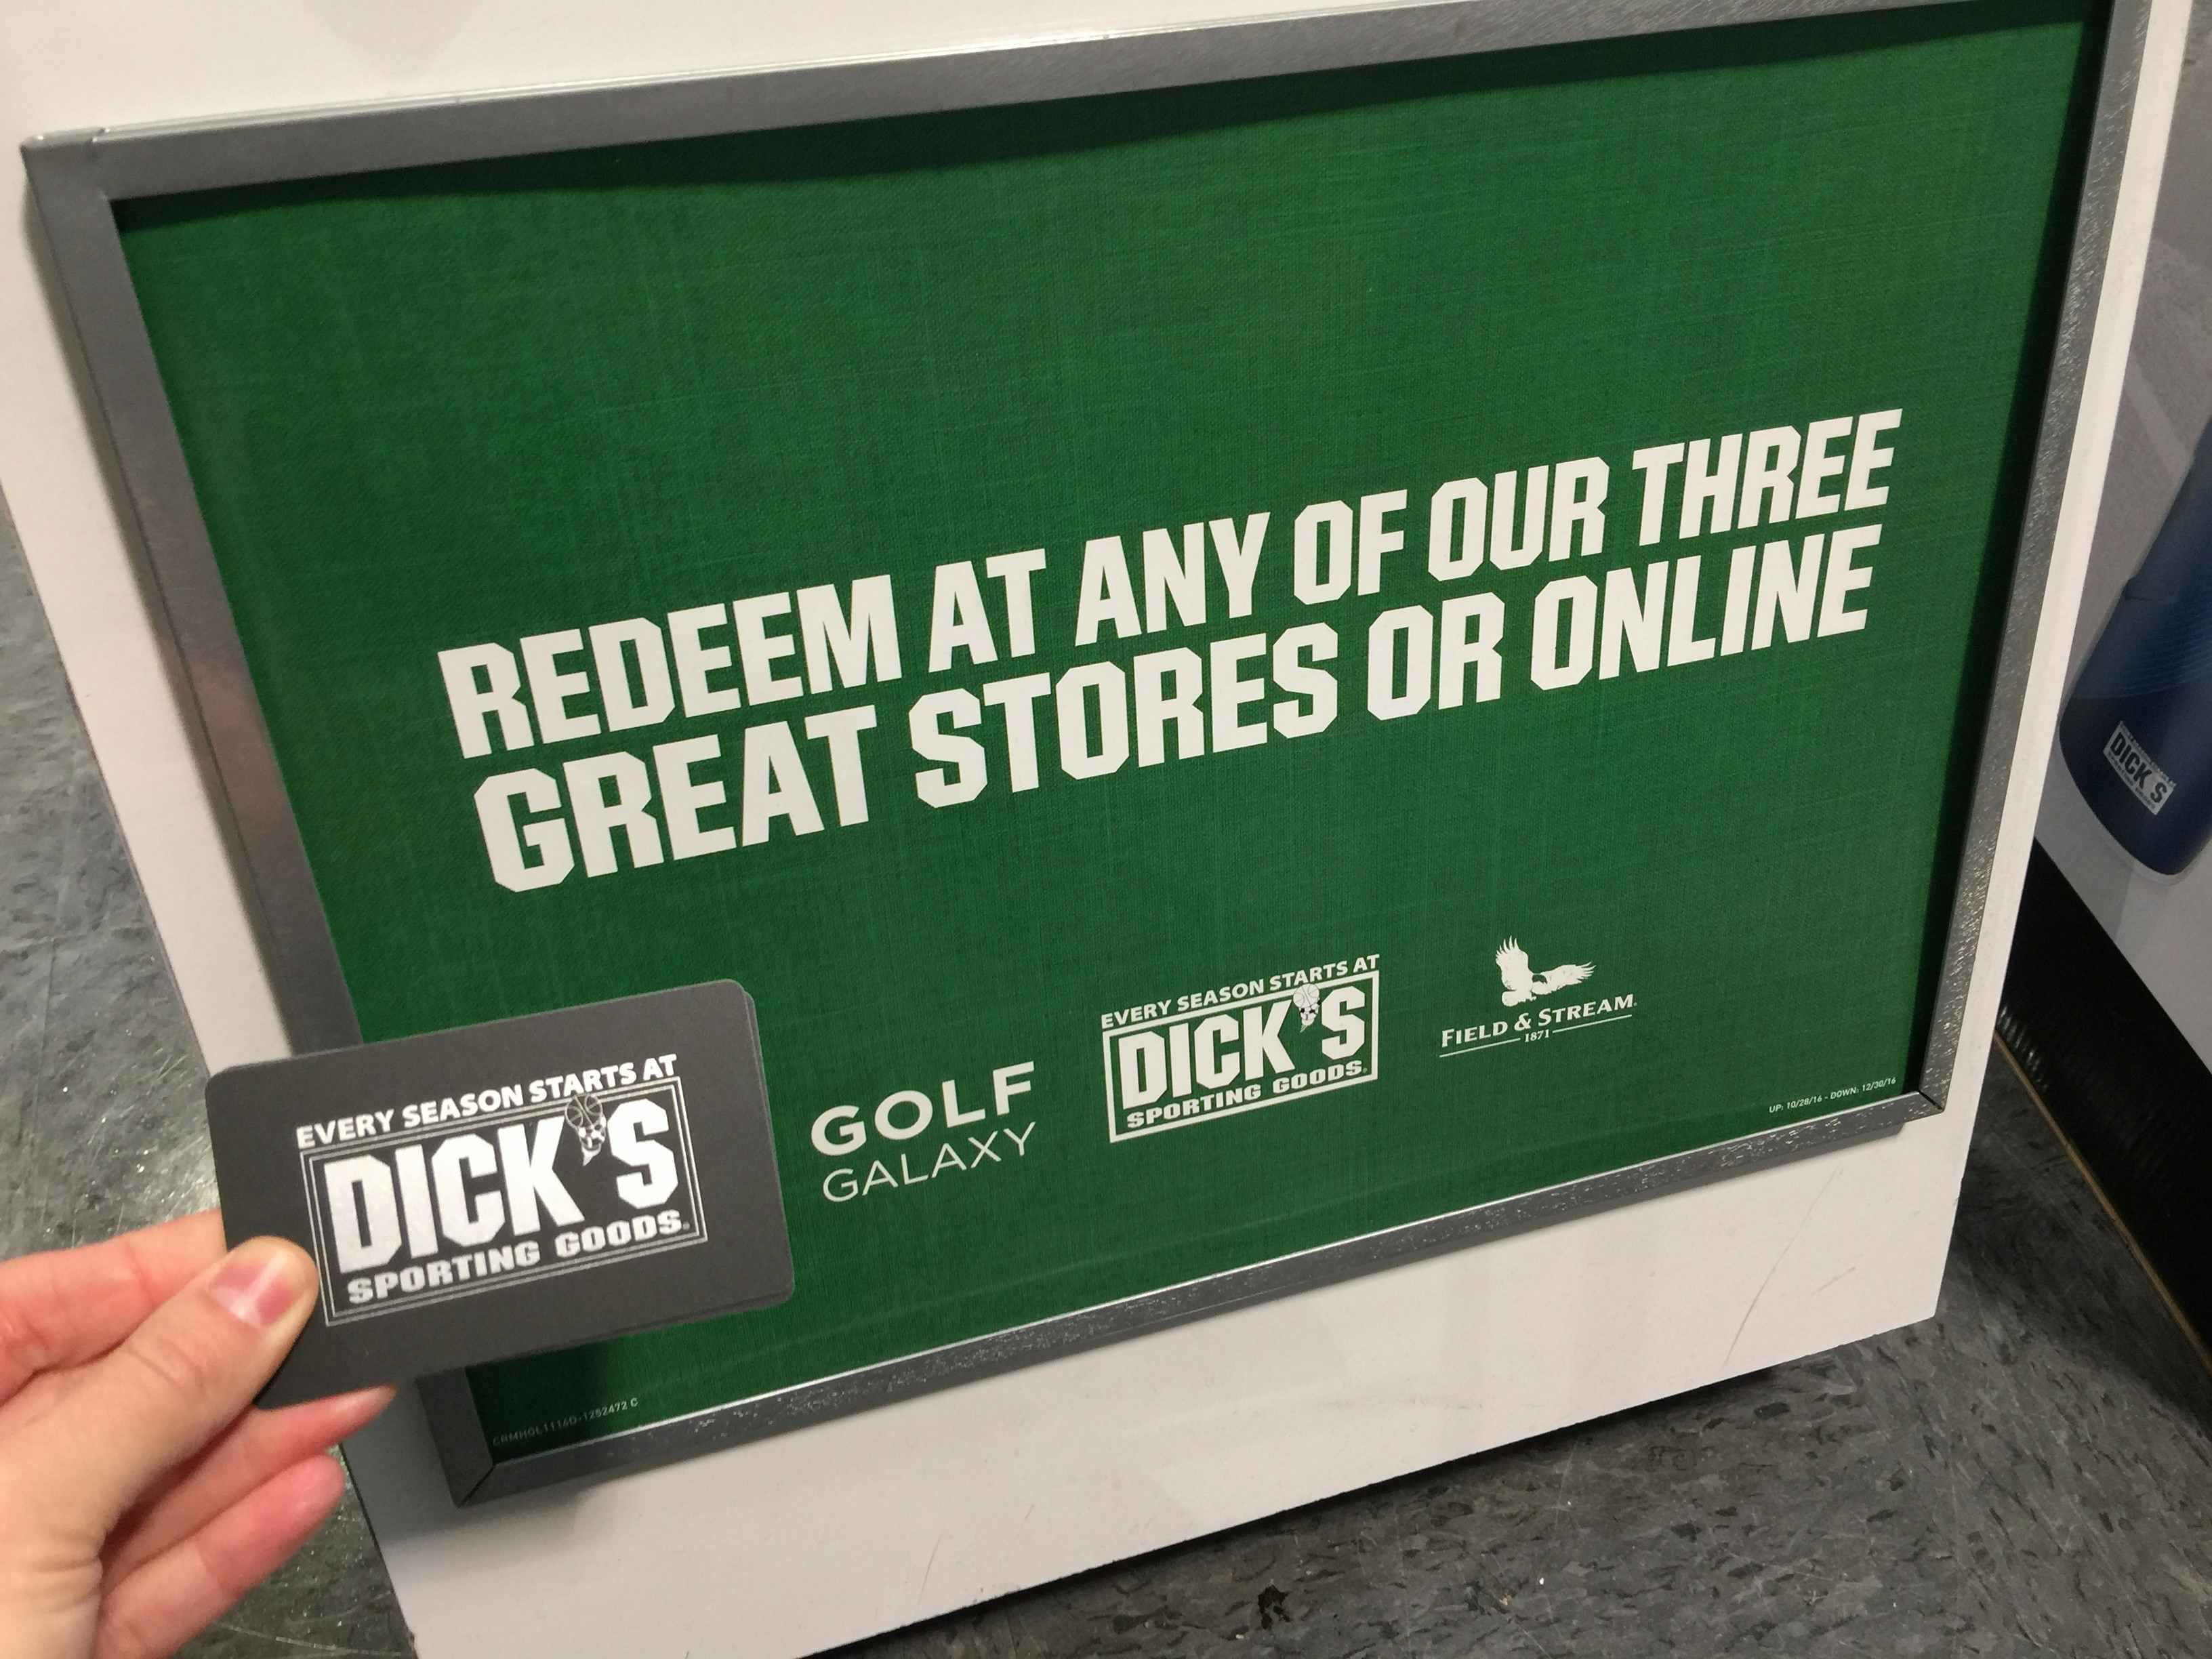 Every Way Imaginable to Score Deals at Dick's Sporting Goods - The